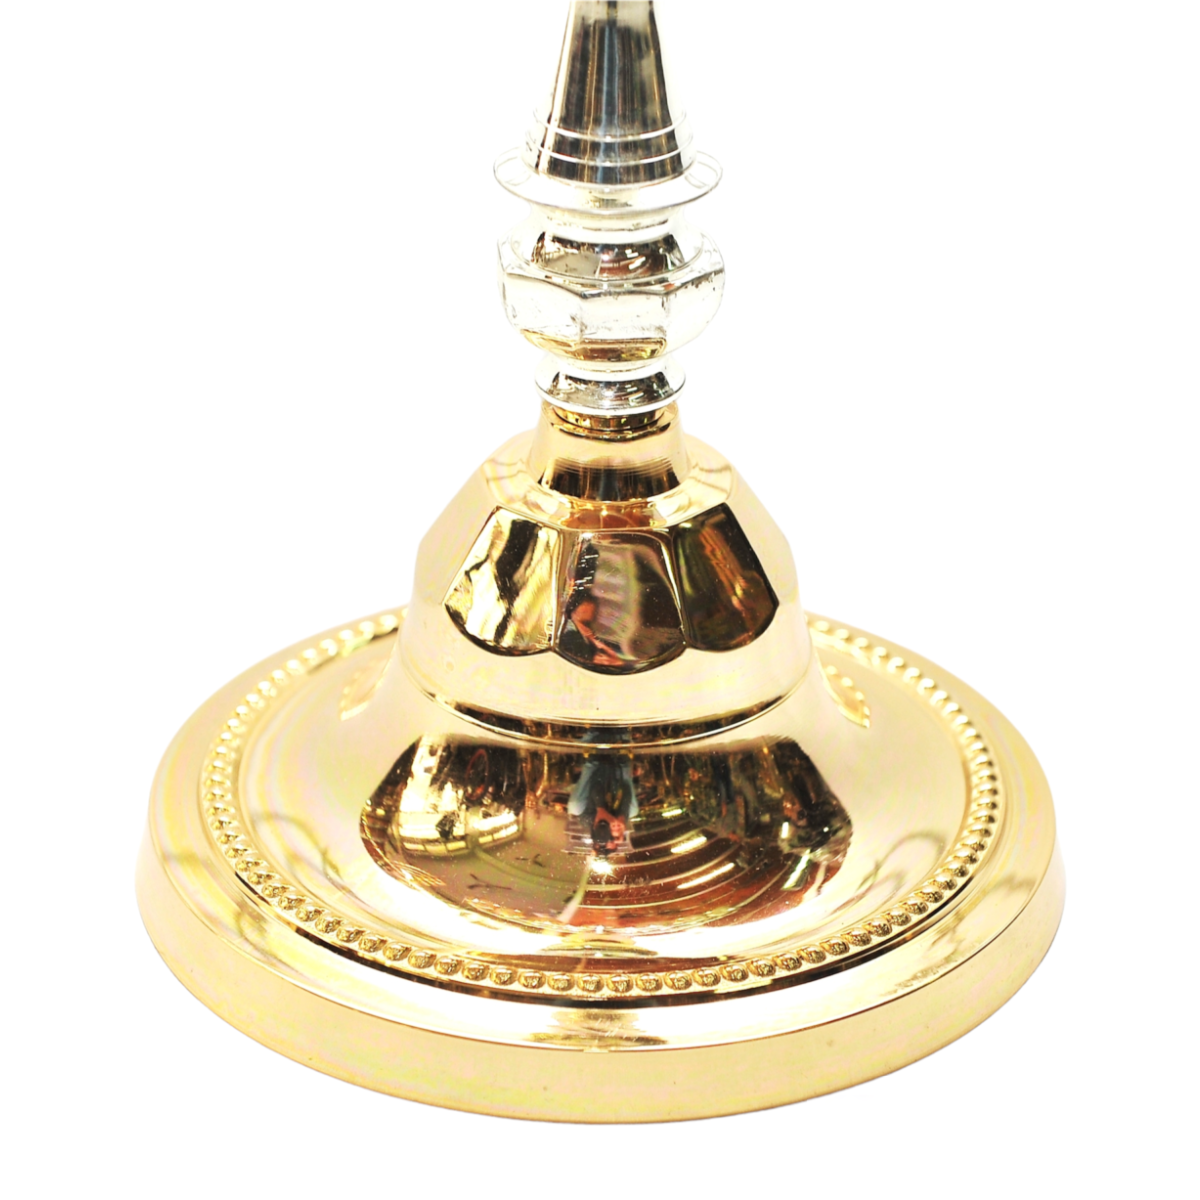 Temple Menorah Gold & Silver Plated Candle Holder from Jerusalem 18.9″ / 48 cm